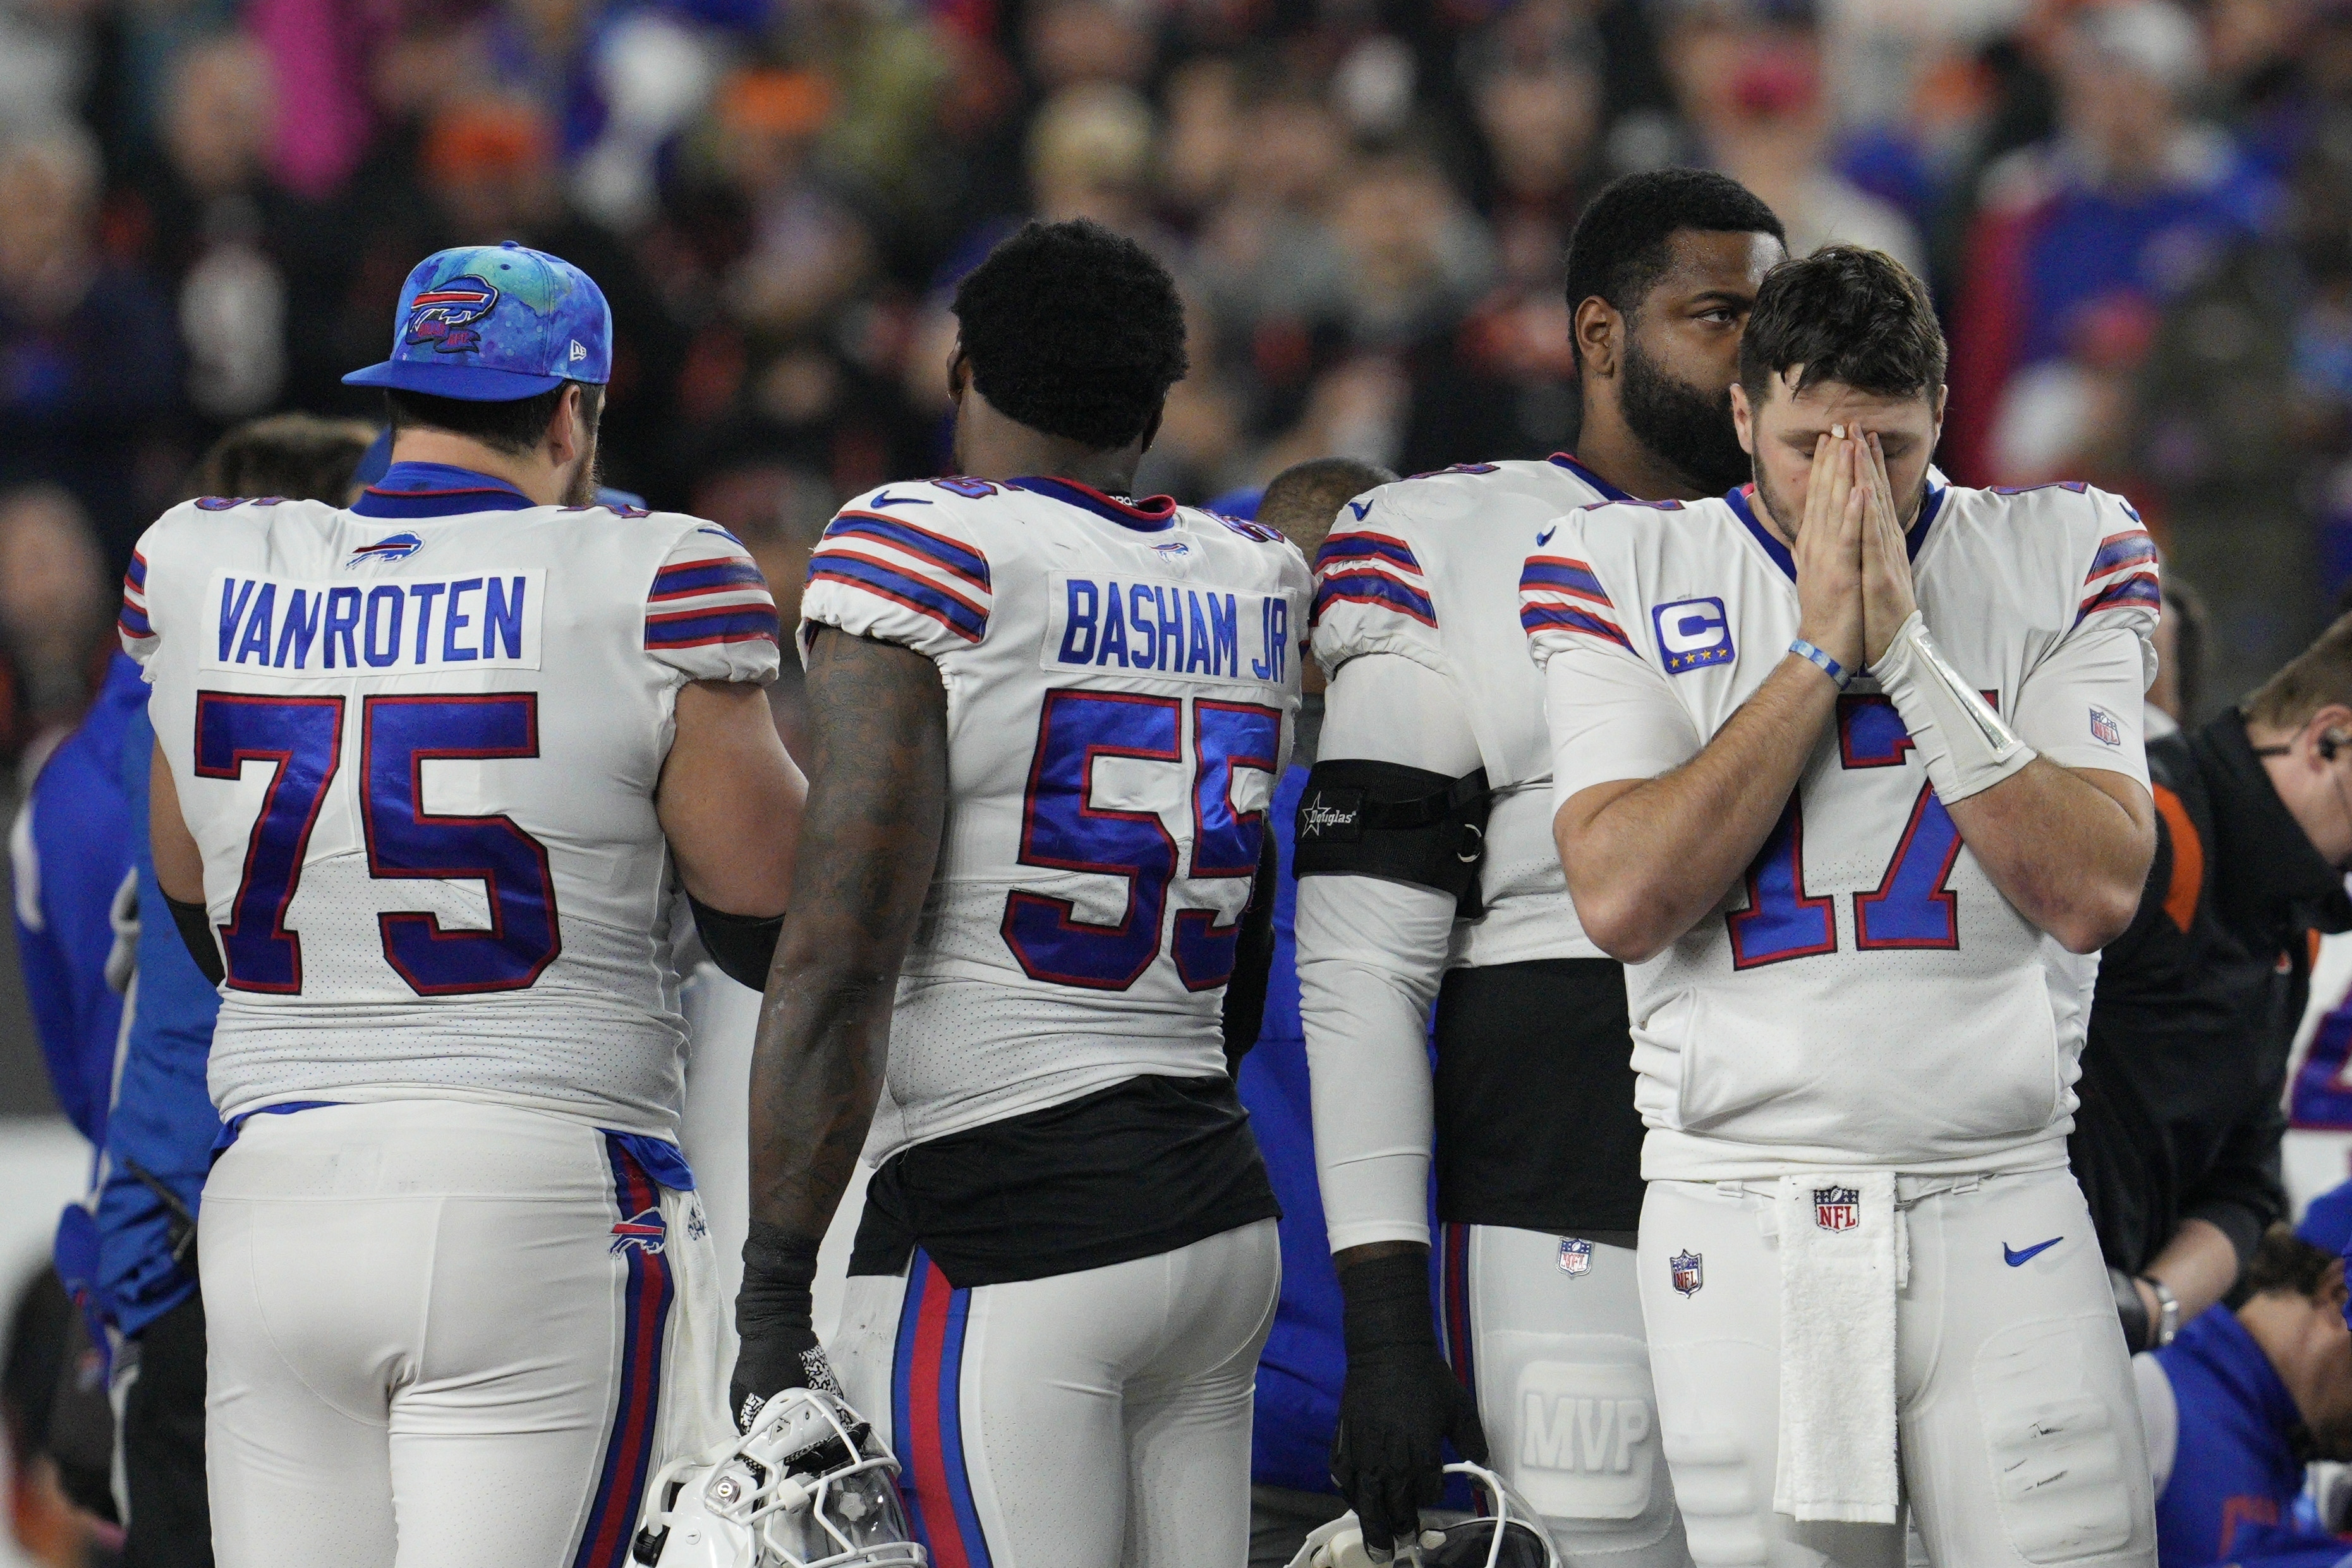 Buffalo Bills safety Damar Hamlin in critical condition after collapse on  field; Bills-Bengals game suspended